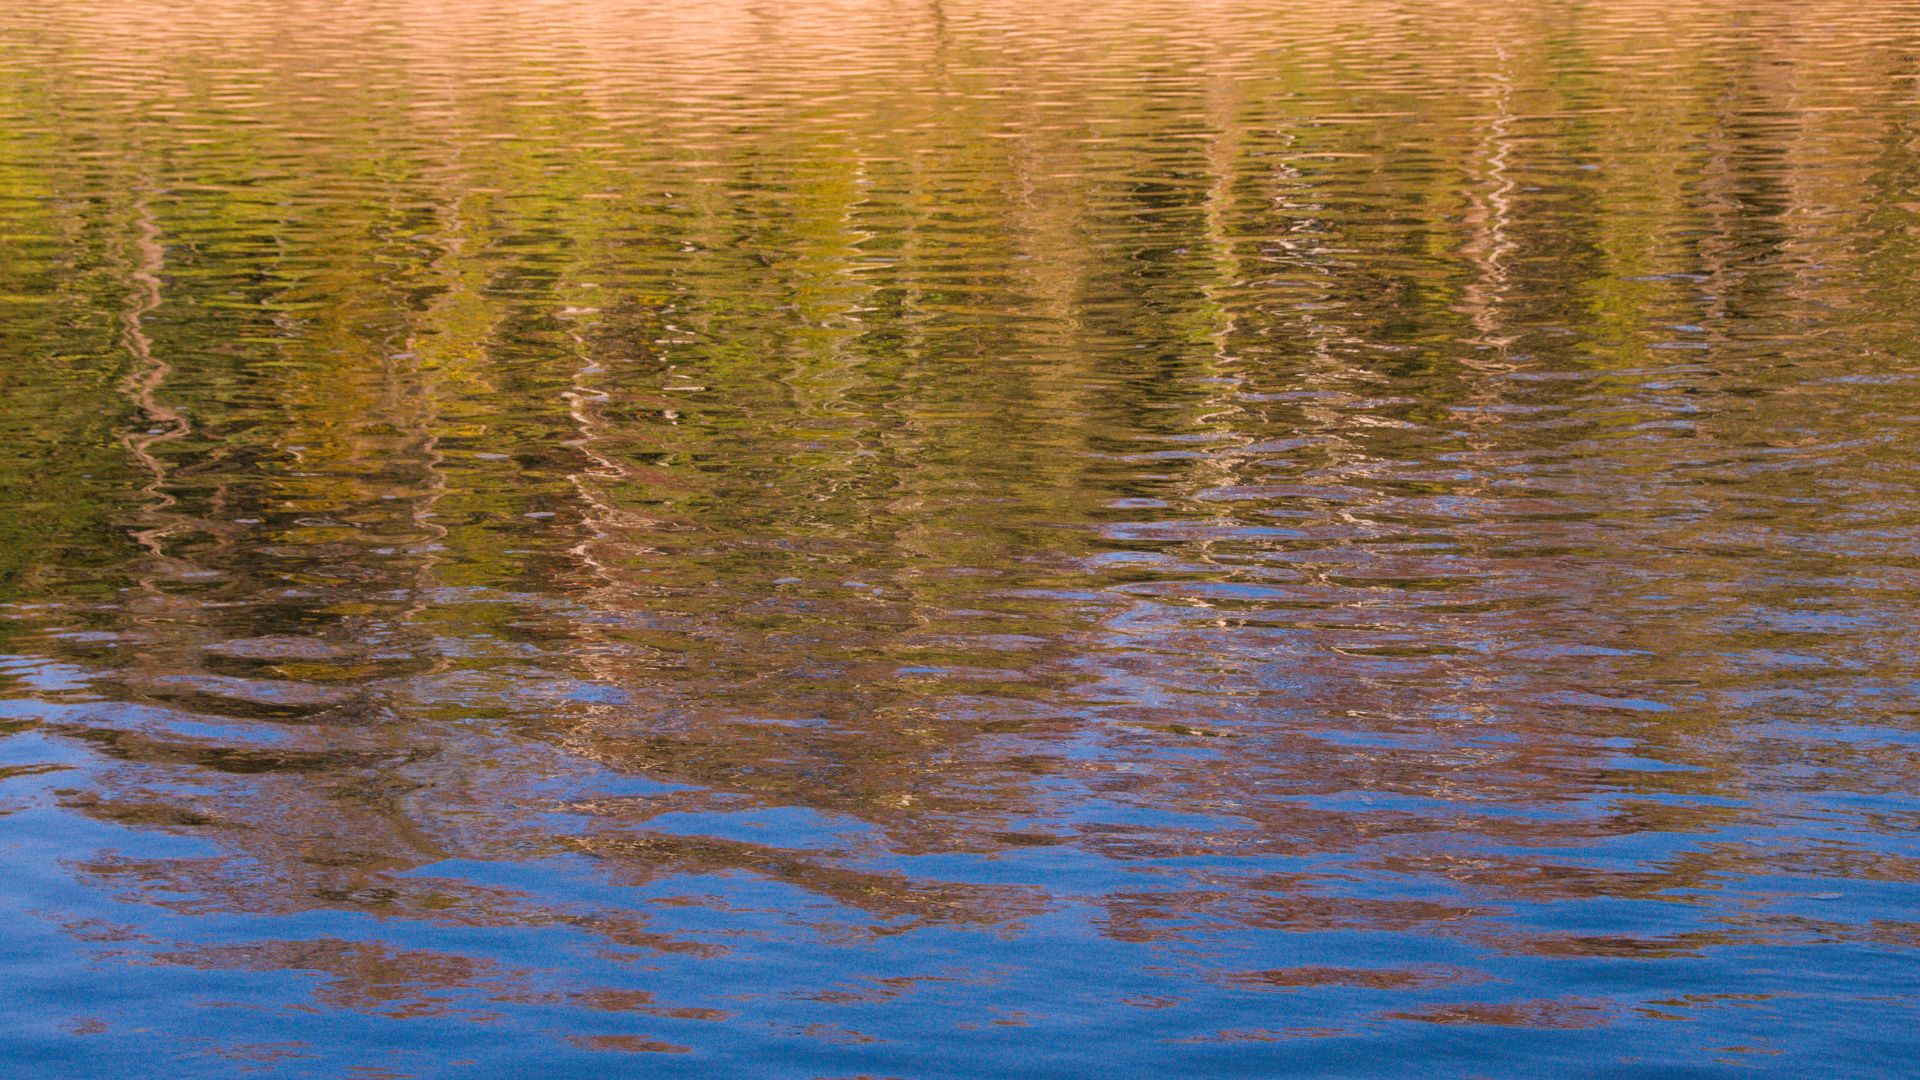 Blurry reflections of the trees in ripples of water 